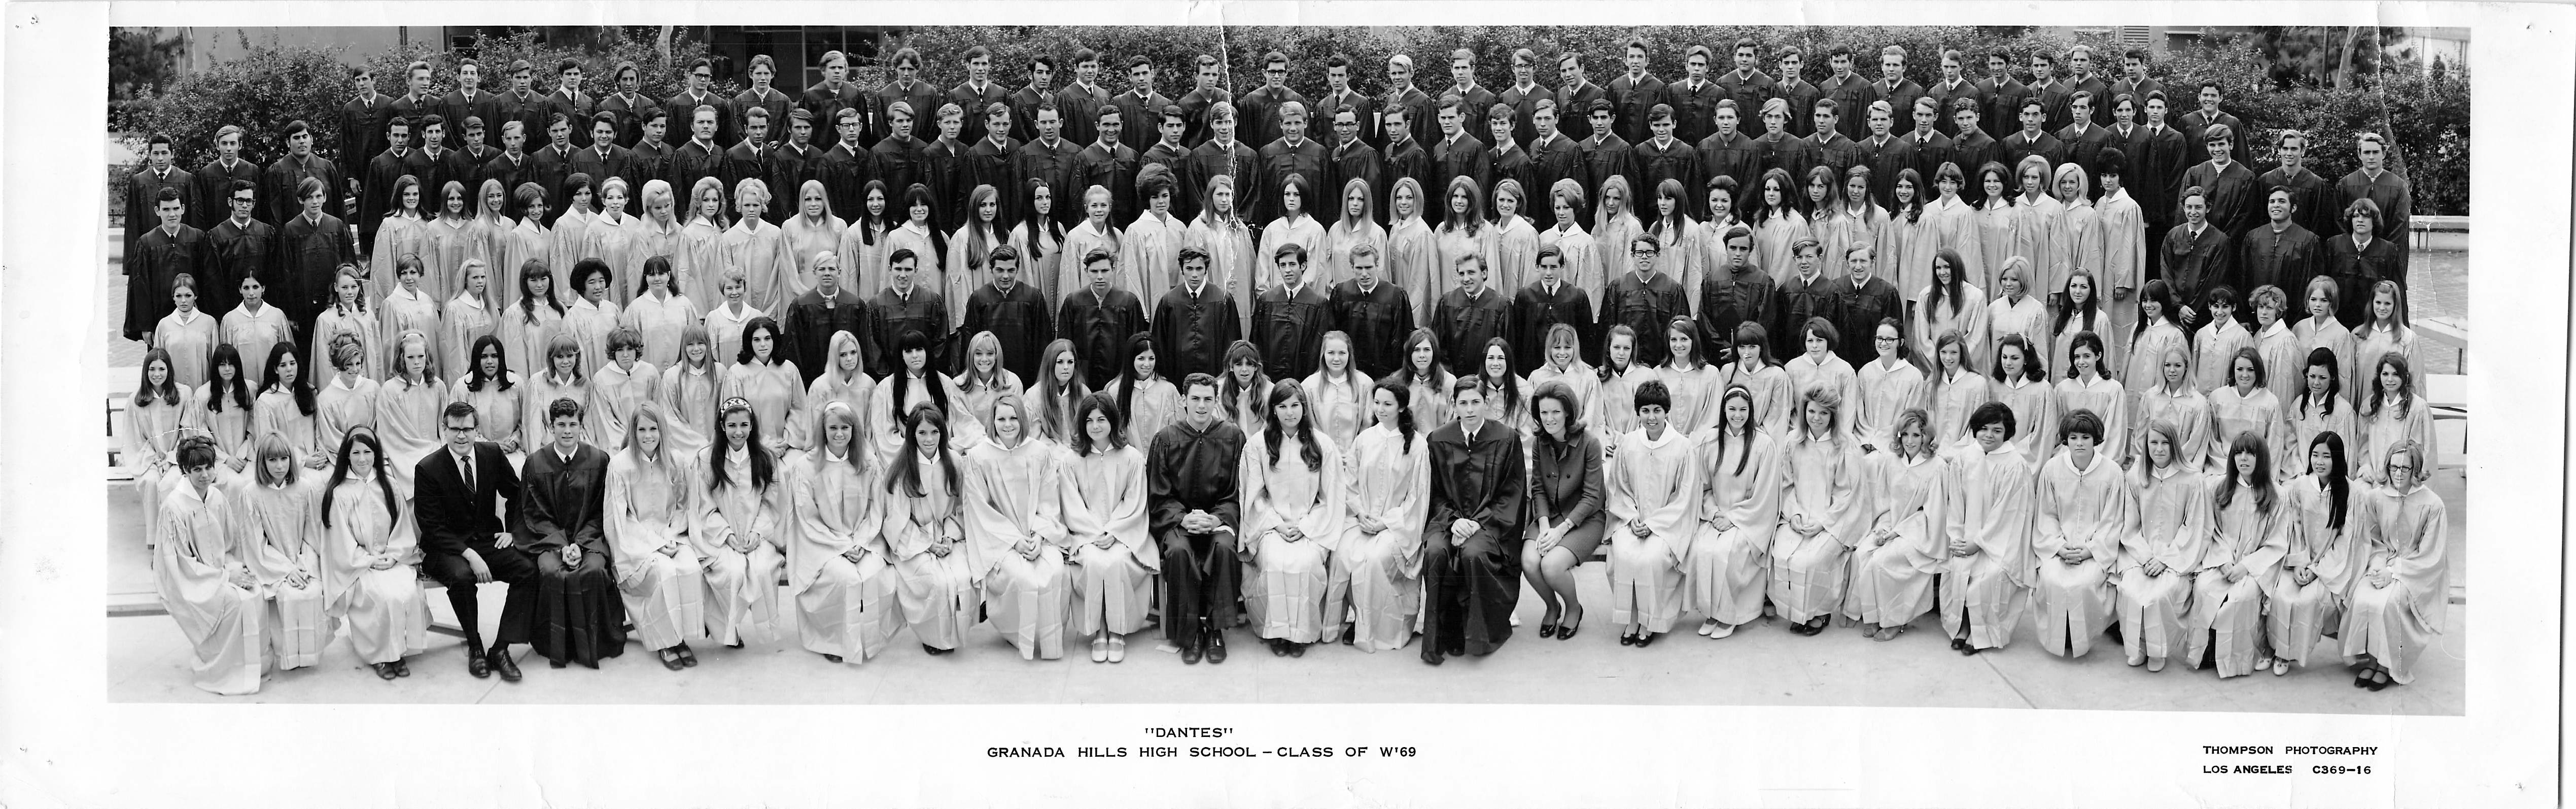 Granada Hills High School Class of Winter 1969 - Click on image for enlarged version